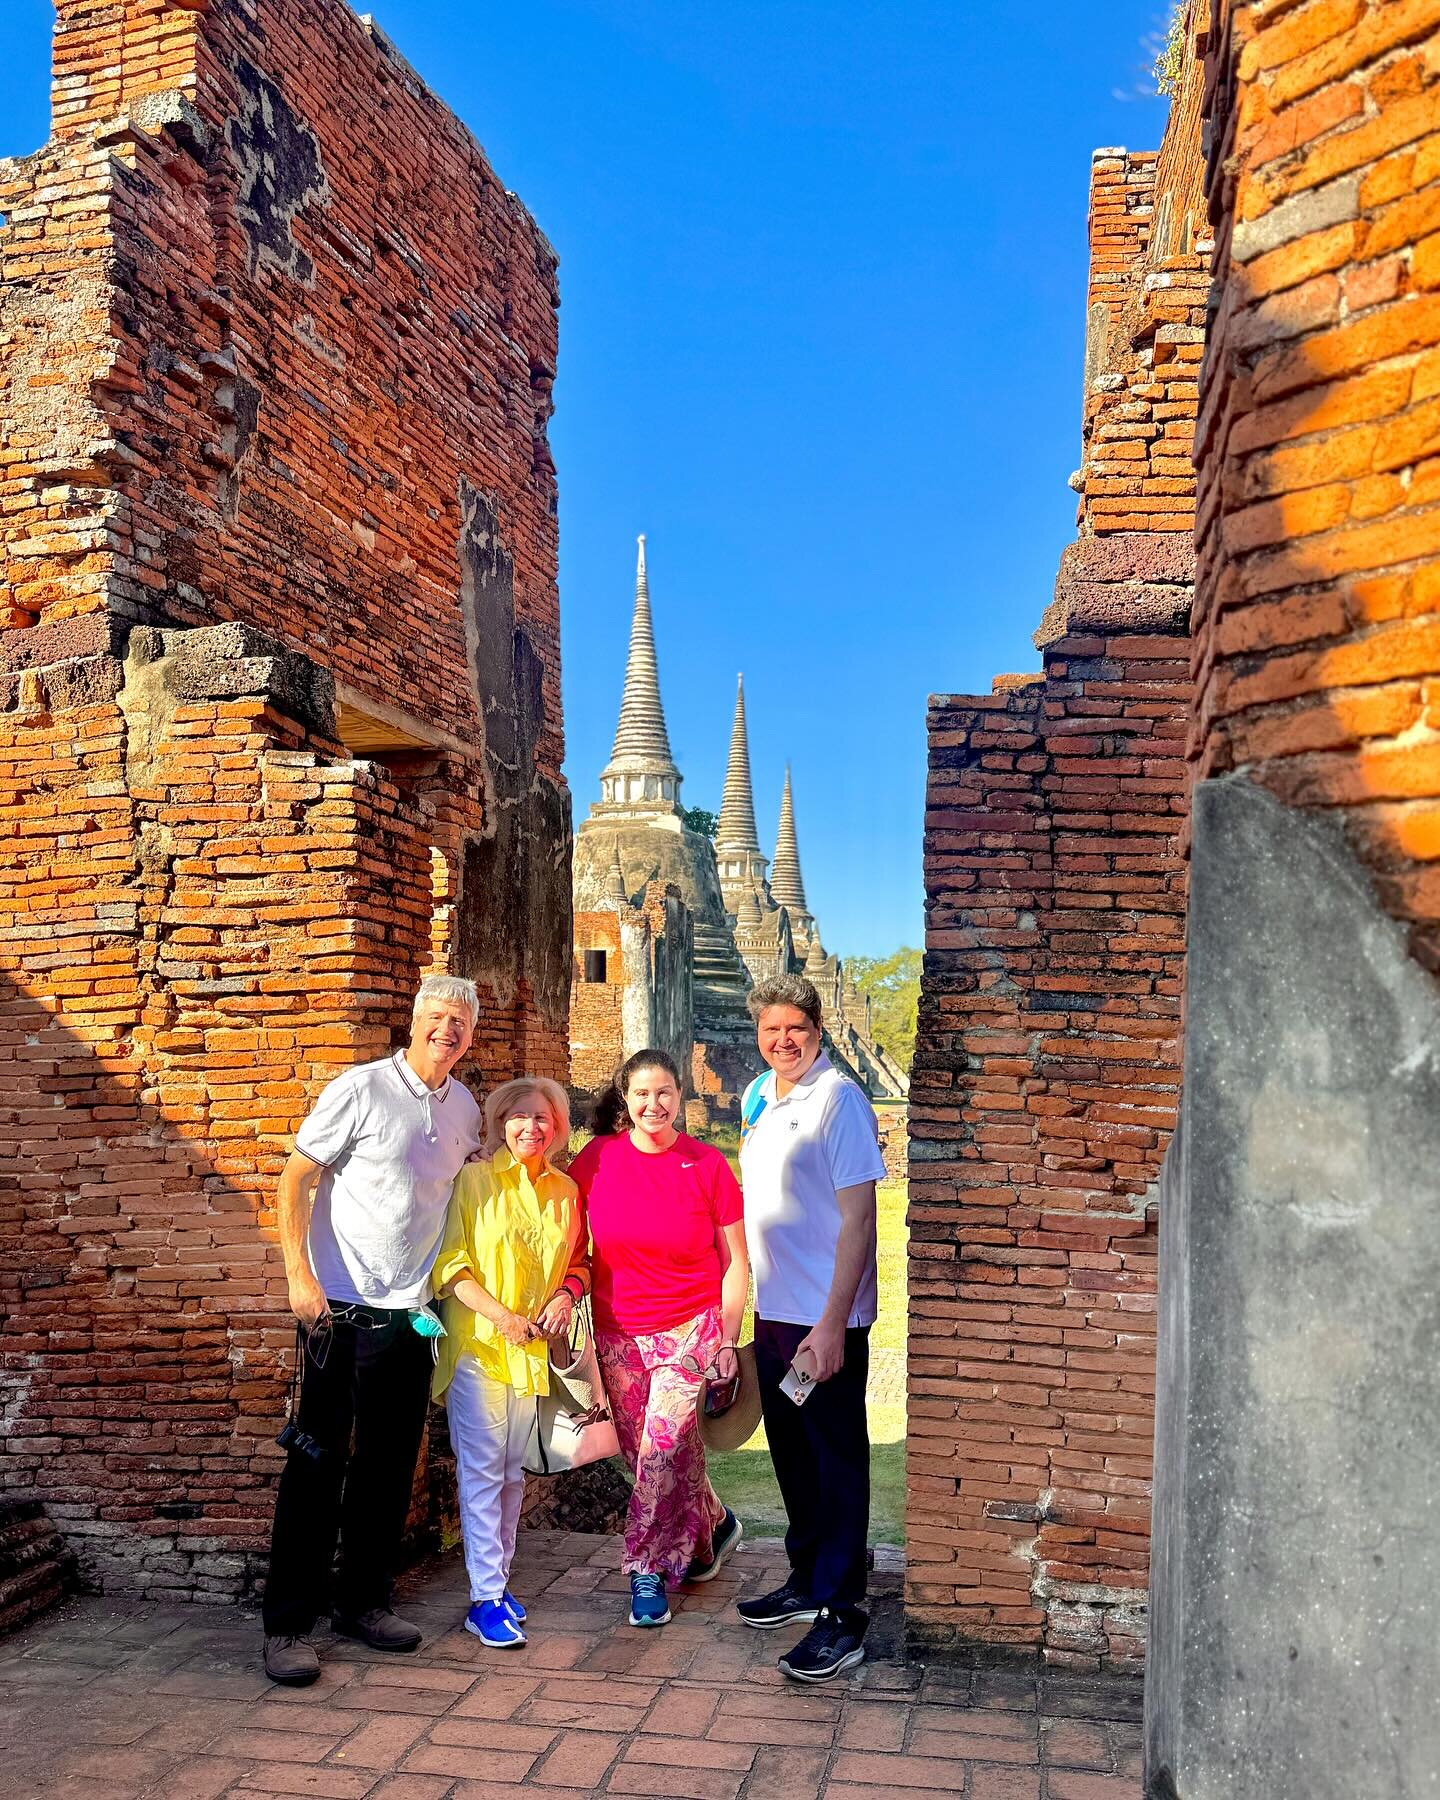 📌The World Heritage Site of &lsquo;Ayutthaya&rsquo; is recognized by Unesco in 1991.

Thank you very much 🙏Gardner Family 🇺🇸 for having me show you Ayutthata day tour. 🥰🙏 

📍Ayutthaya Historical Park Thailand │ North of Bangkok 60 Kilometers /